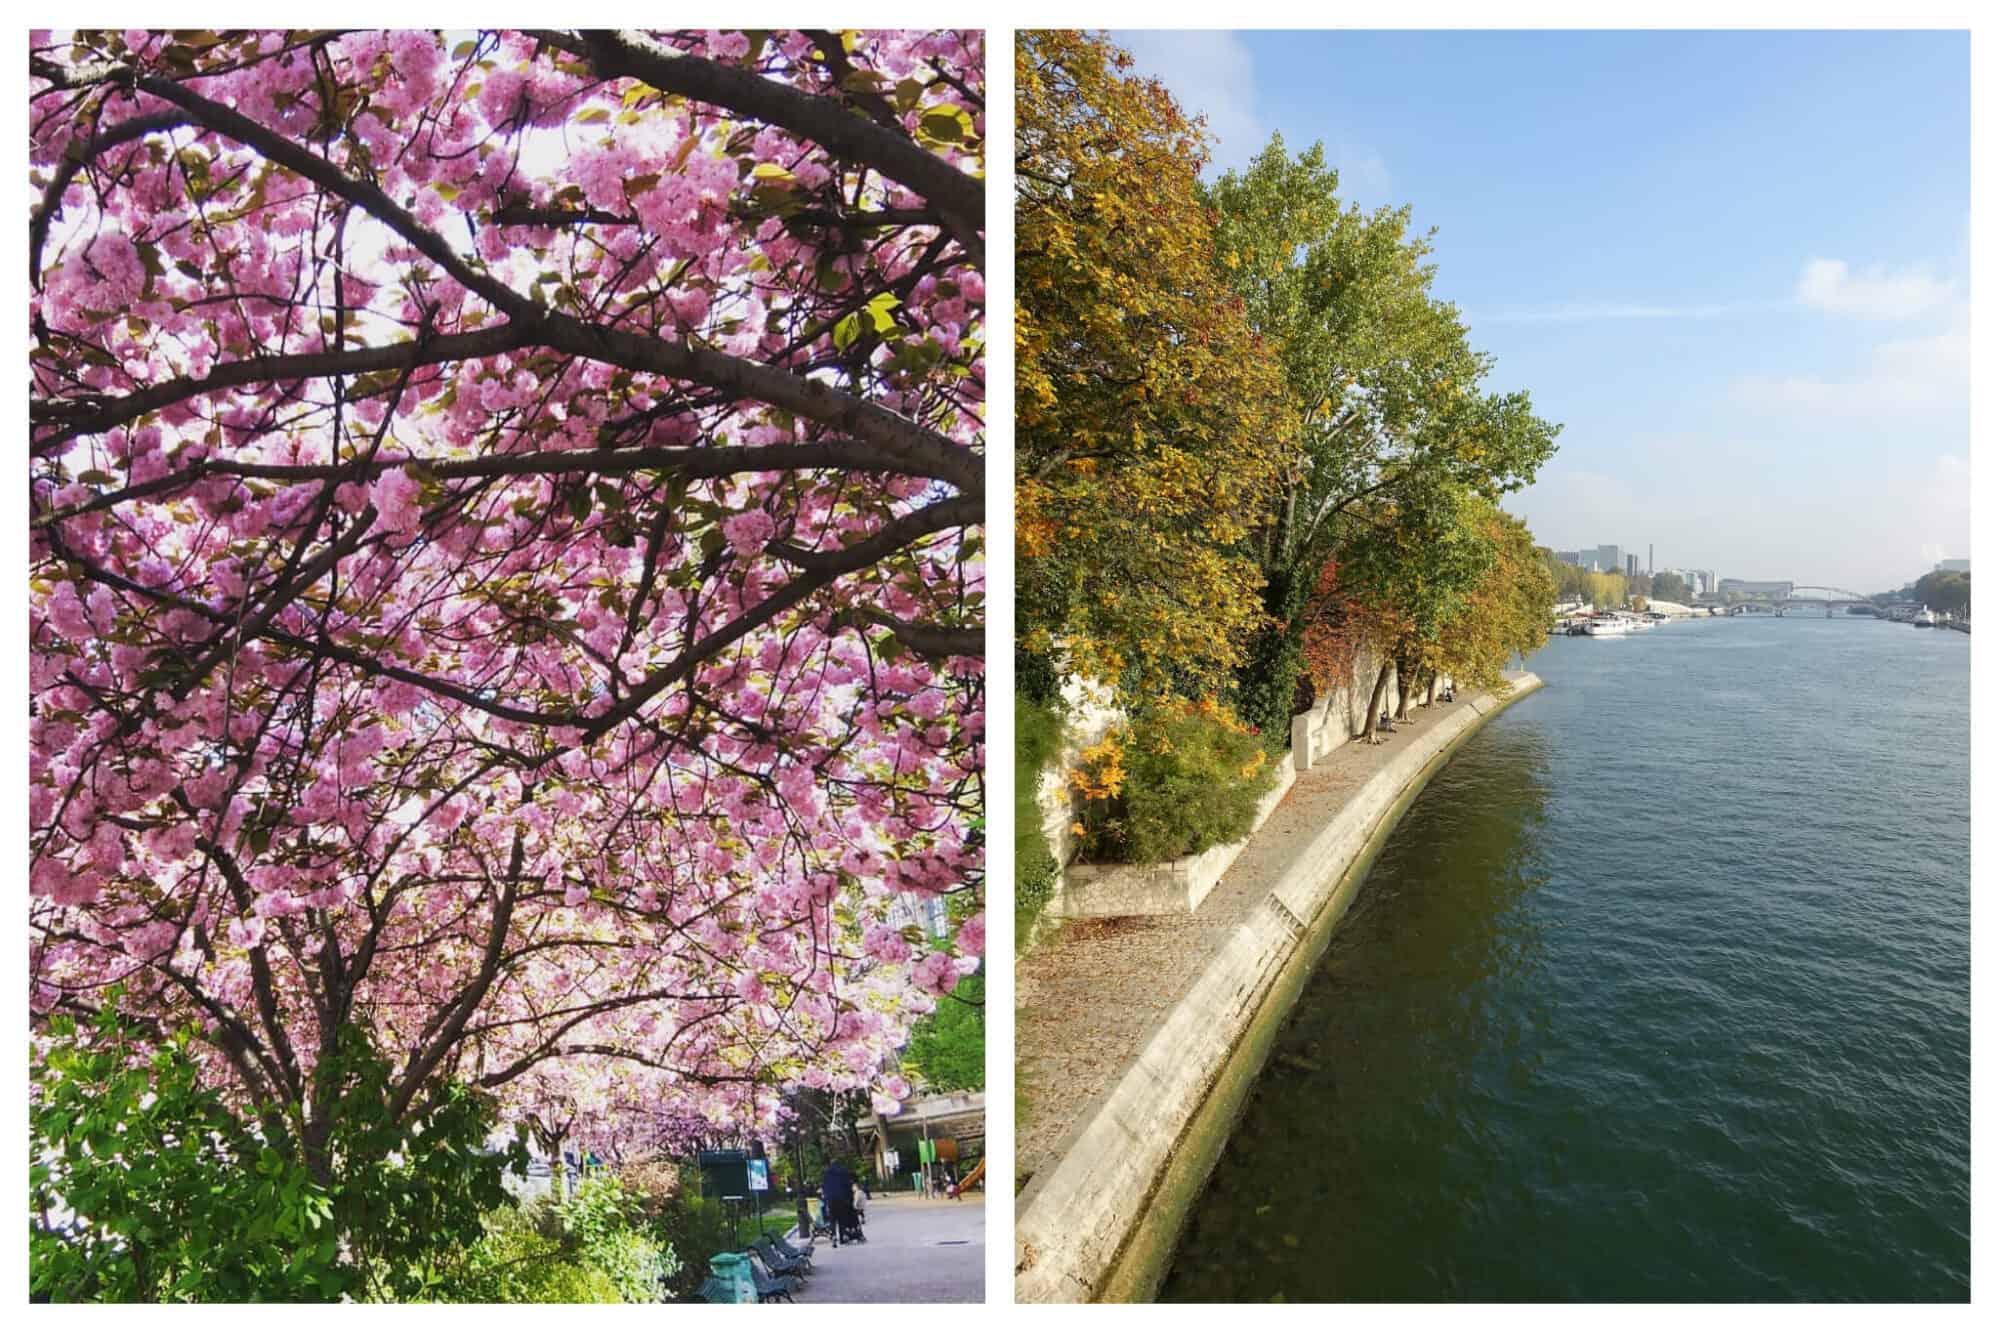 Left: Beautiful pink cherry blossoms are in full bloom on a tree in the Square Paul-Langevin, Right: Trees are in full bloom along the Seine at the Square Barye on a sunny spring day in Paris.